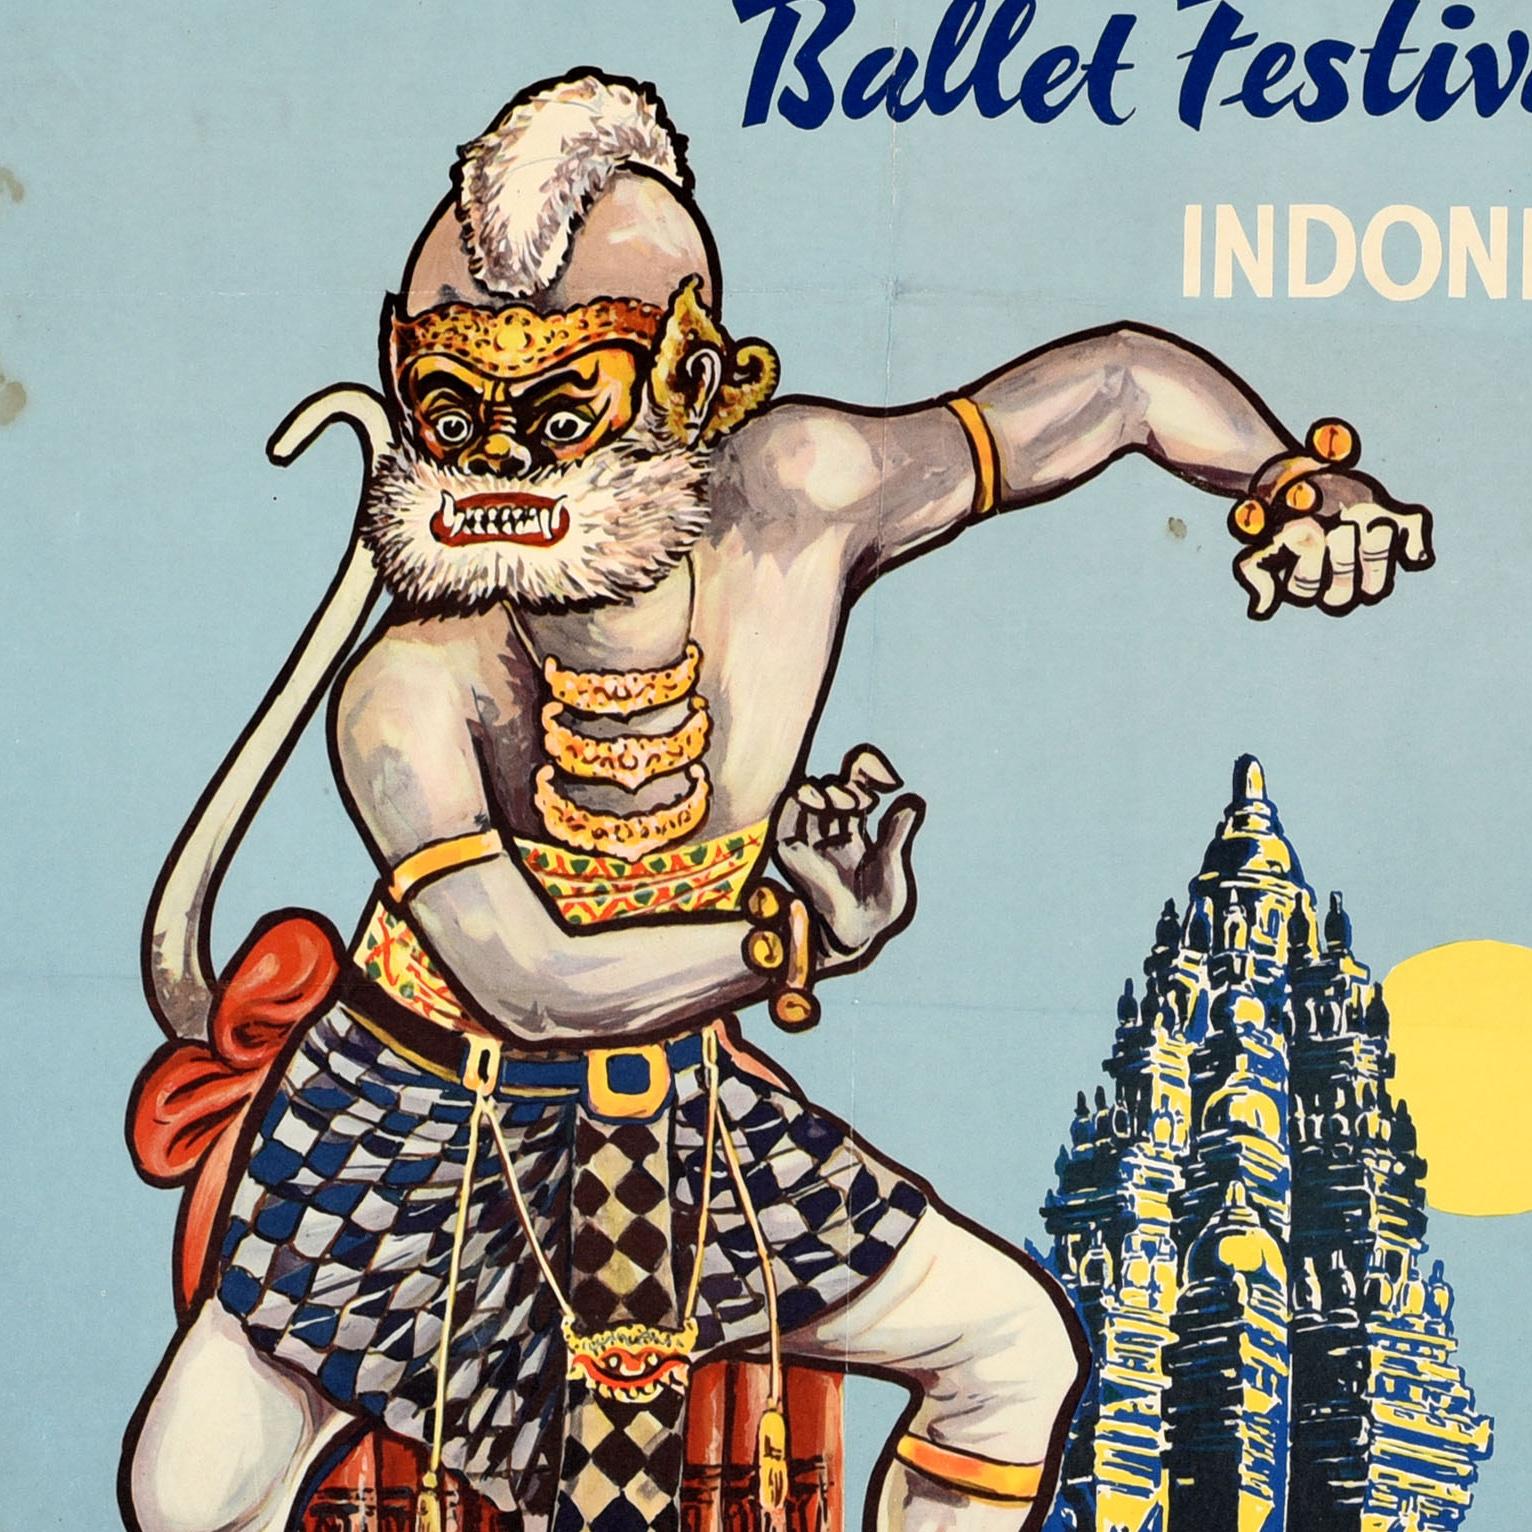 Original vintage travel advertising poster for the Ramayana Ballet Festival Indonesia every full moon June-October featuring a monkey god dance performance with an ancient temple and a bright moon shining in the background, the text on the side